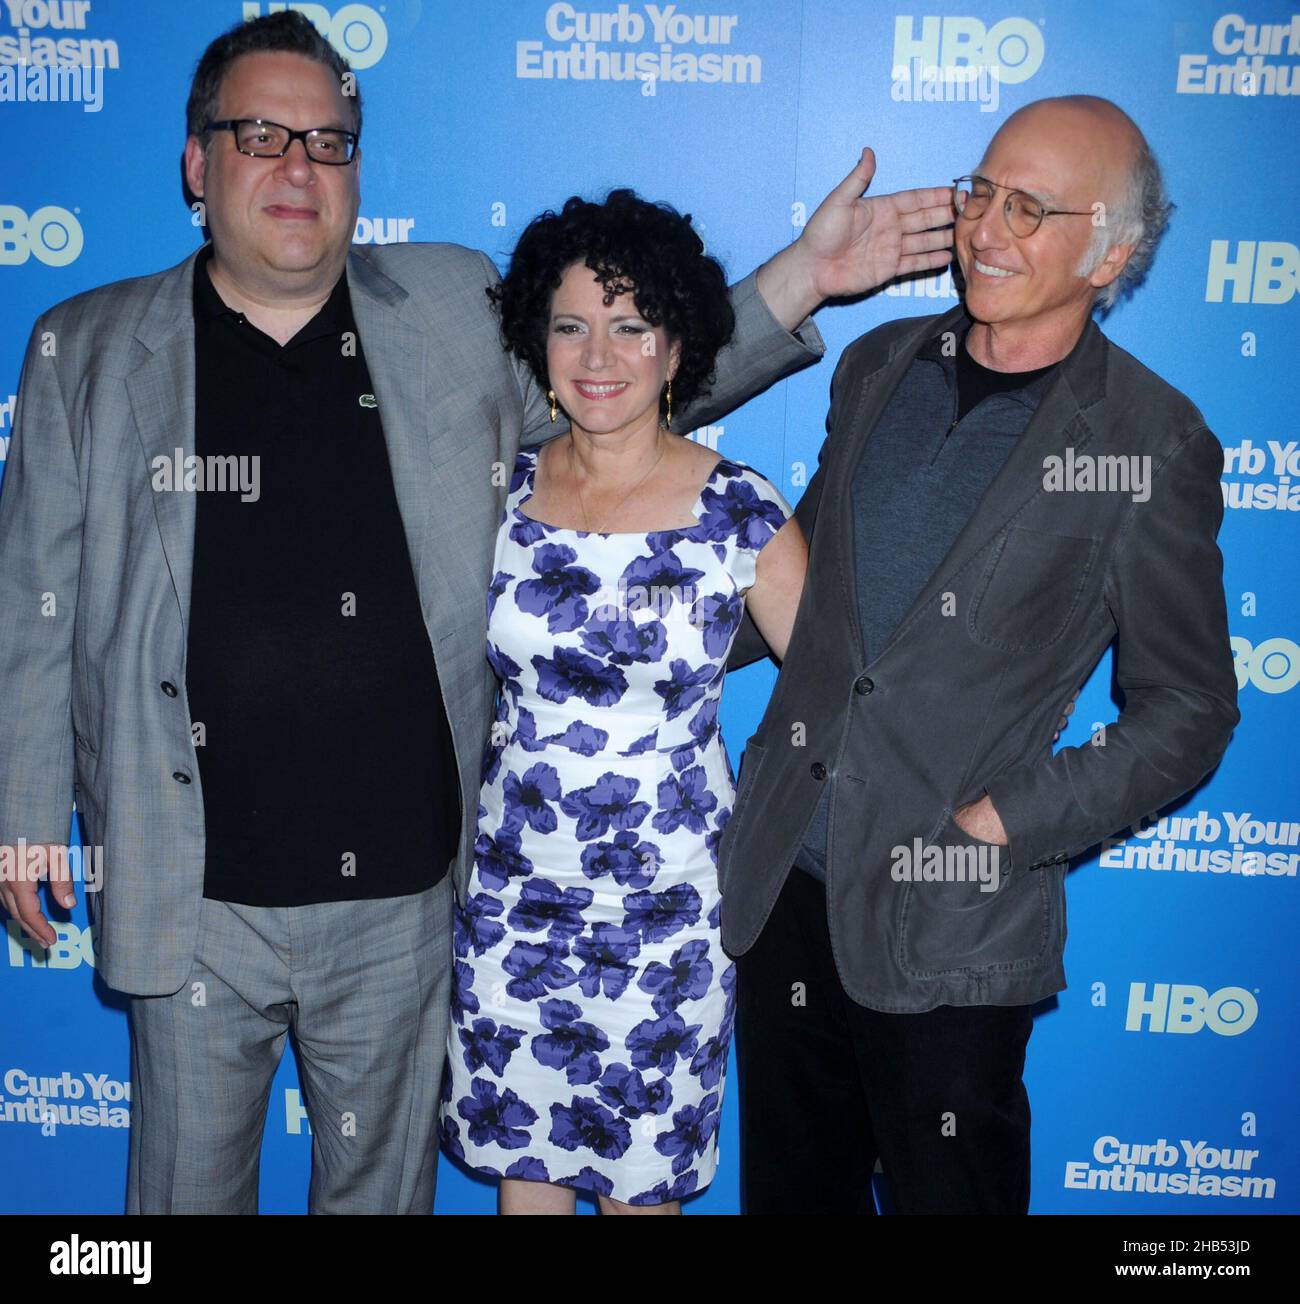 Manhattan, United States Of America. 06th July, 2011. NEW YORK, NY - JULY 06: Jeff Garlin Susie Essman Larry David attends the 'Curb Your Enthusiasm' Season 8 premiere at the Time Warner Screening Room on July 6, 2011 in New York City People: Jeff Garlin Susie Essman Larry David Credit: Storms Media Group/Alamy Live News Stock Photo